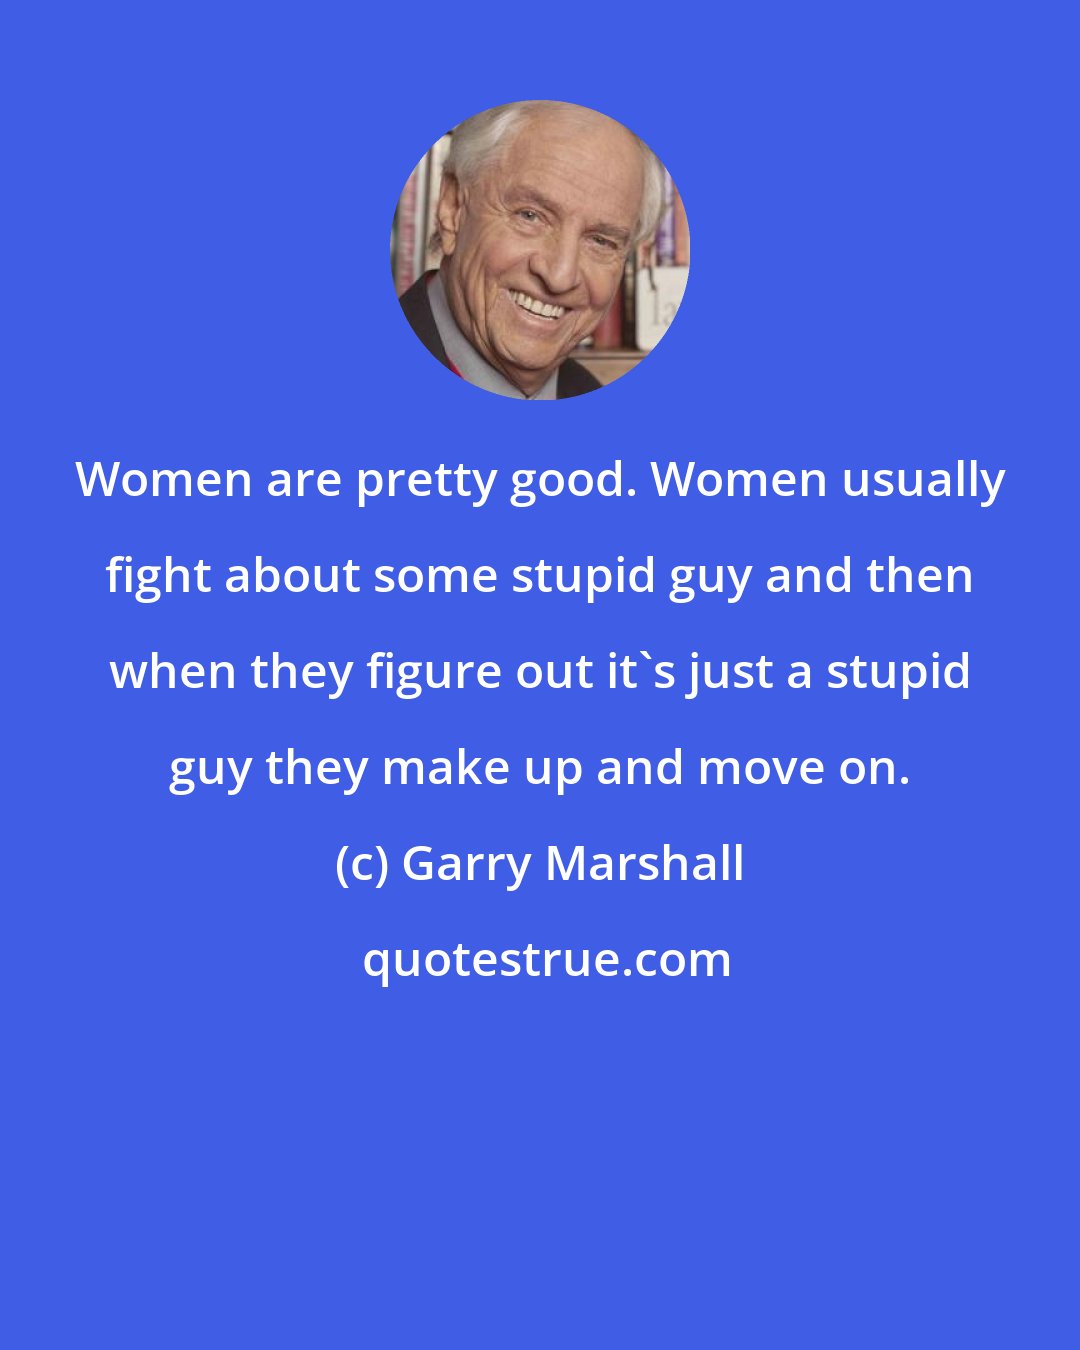 Garry Marshall: Women are pretty good. Women usually fight about some stupid guy and then when they figure out it's just a stupid guy they make up and move on.